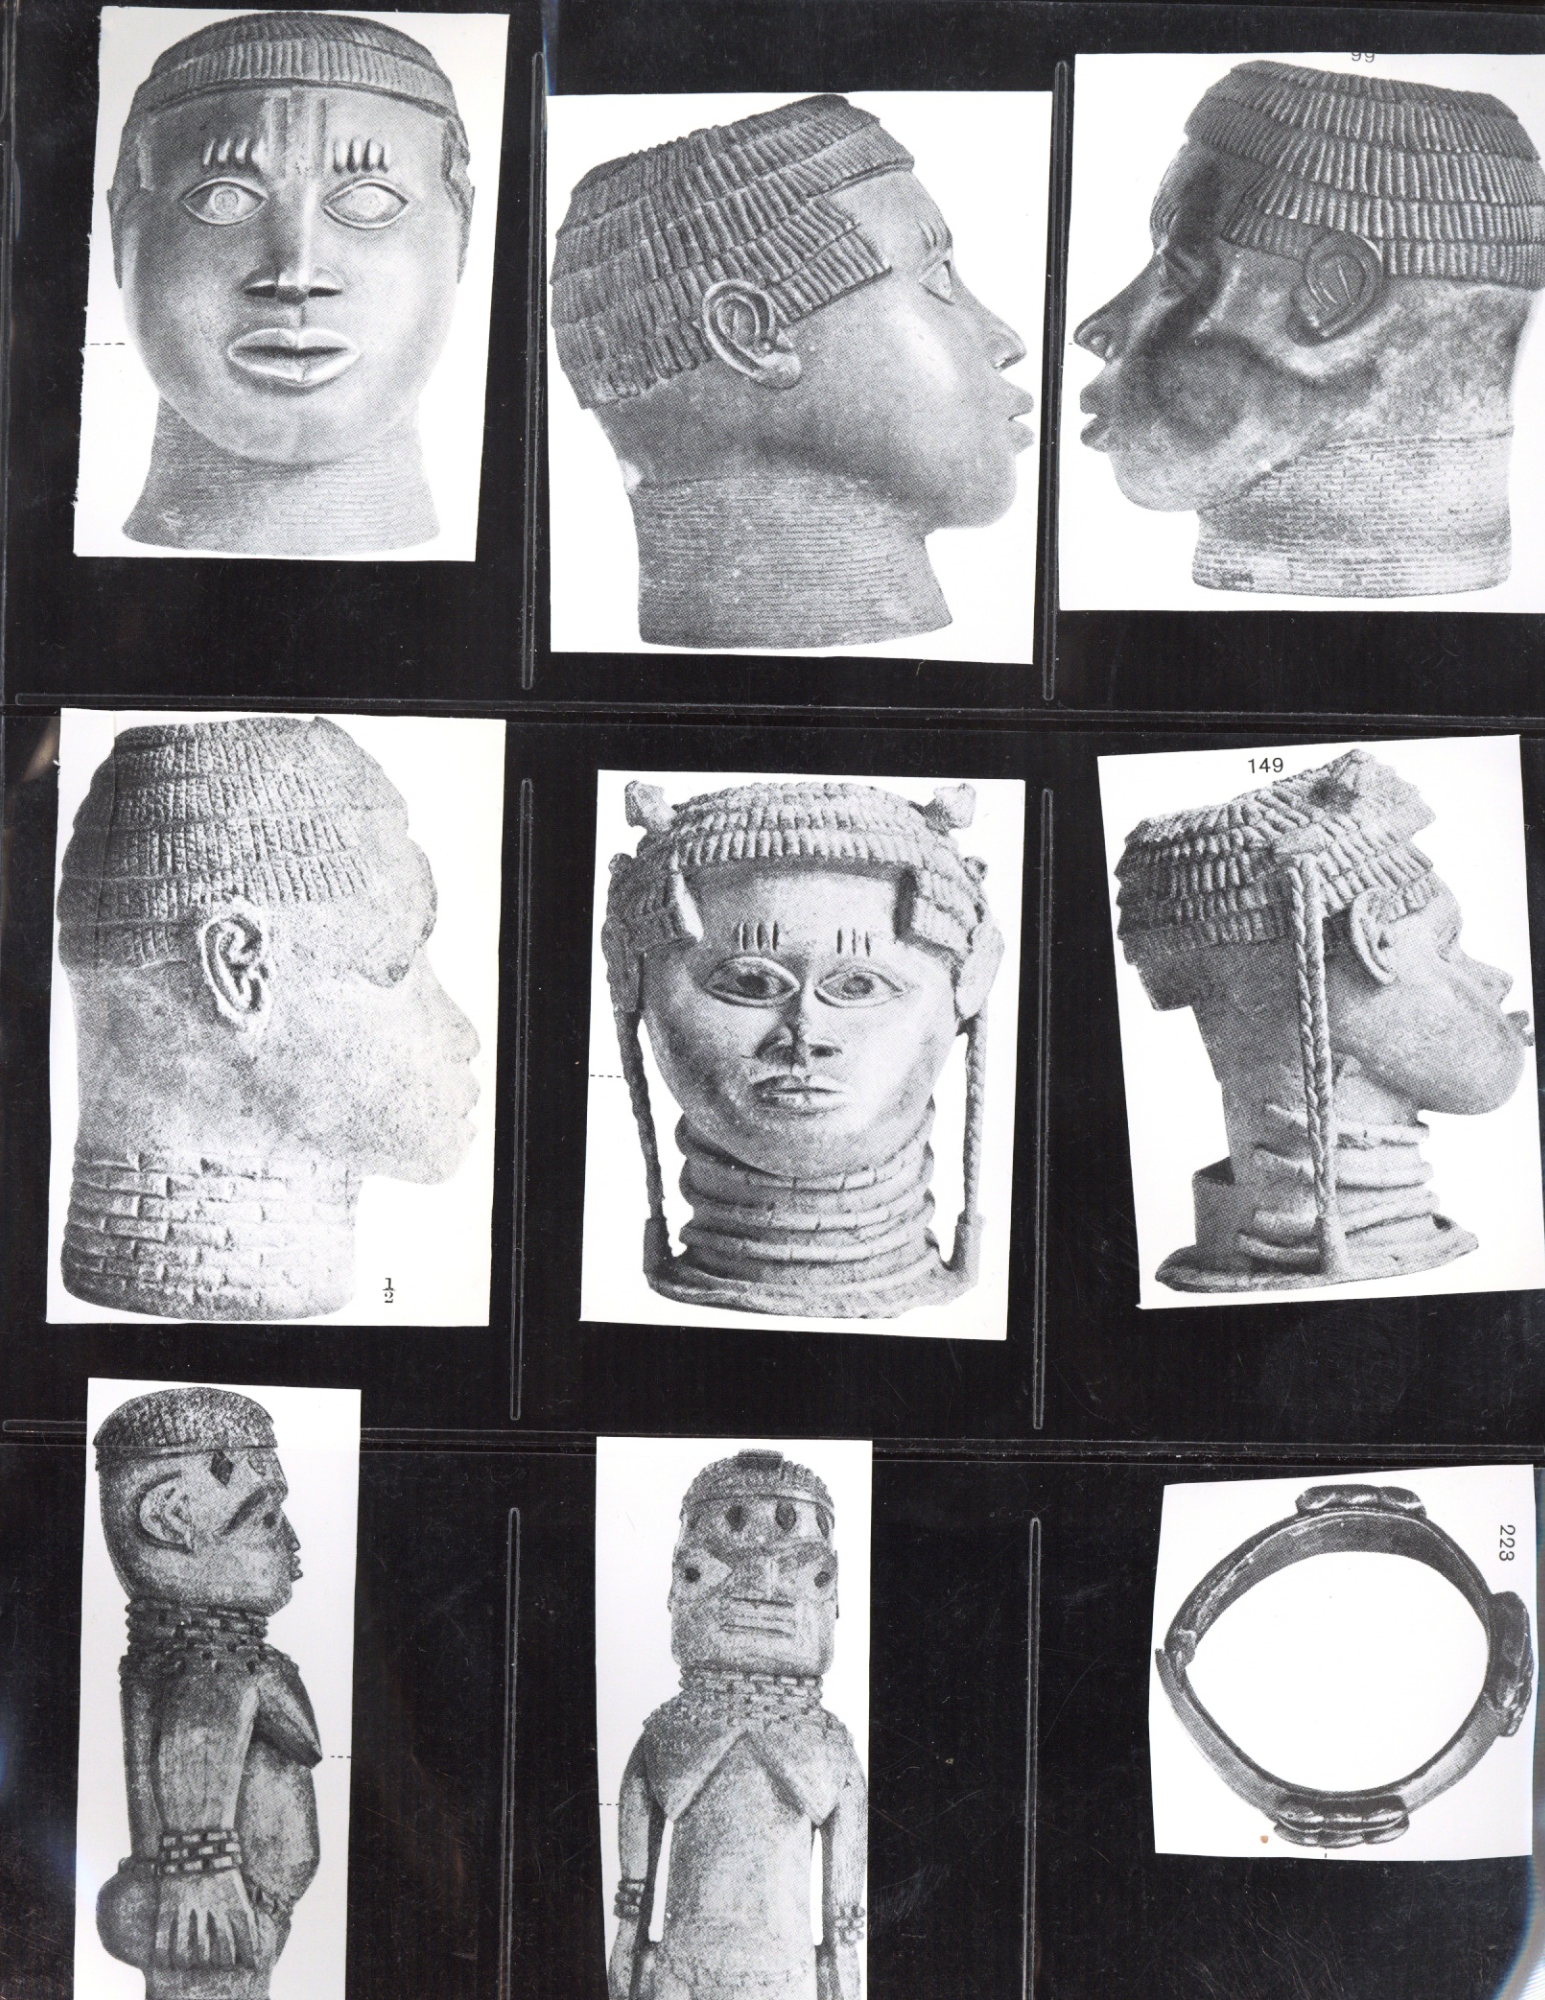  A digital collage of nine black-and-white images of Benin Bronzes arranged in three rows of three on a black background. 